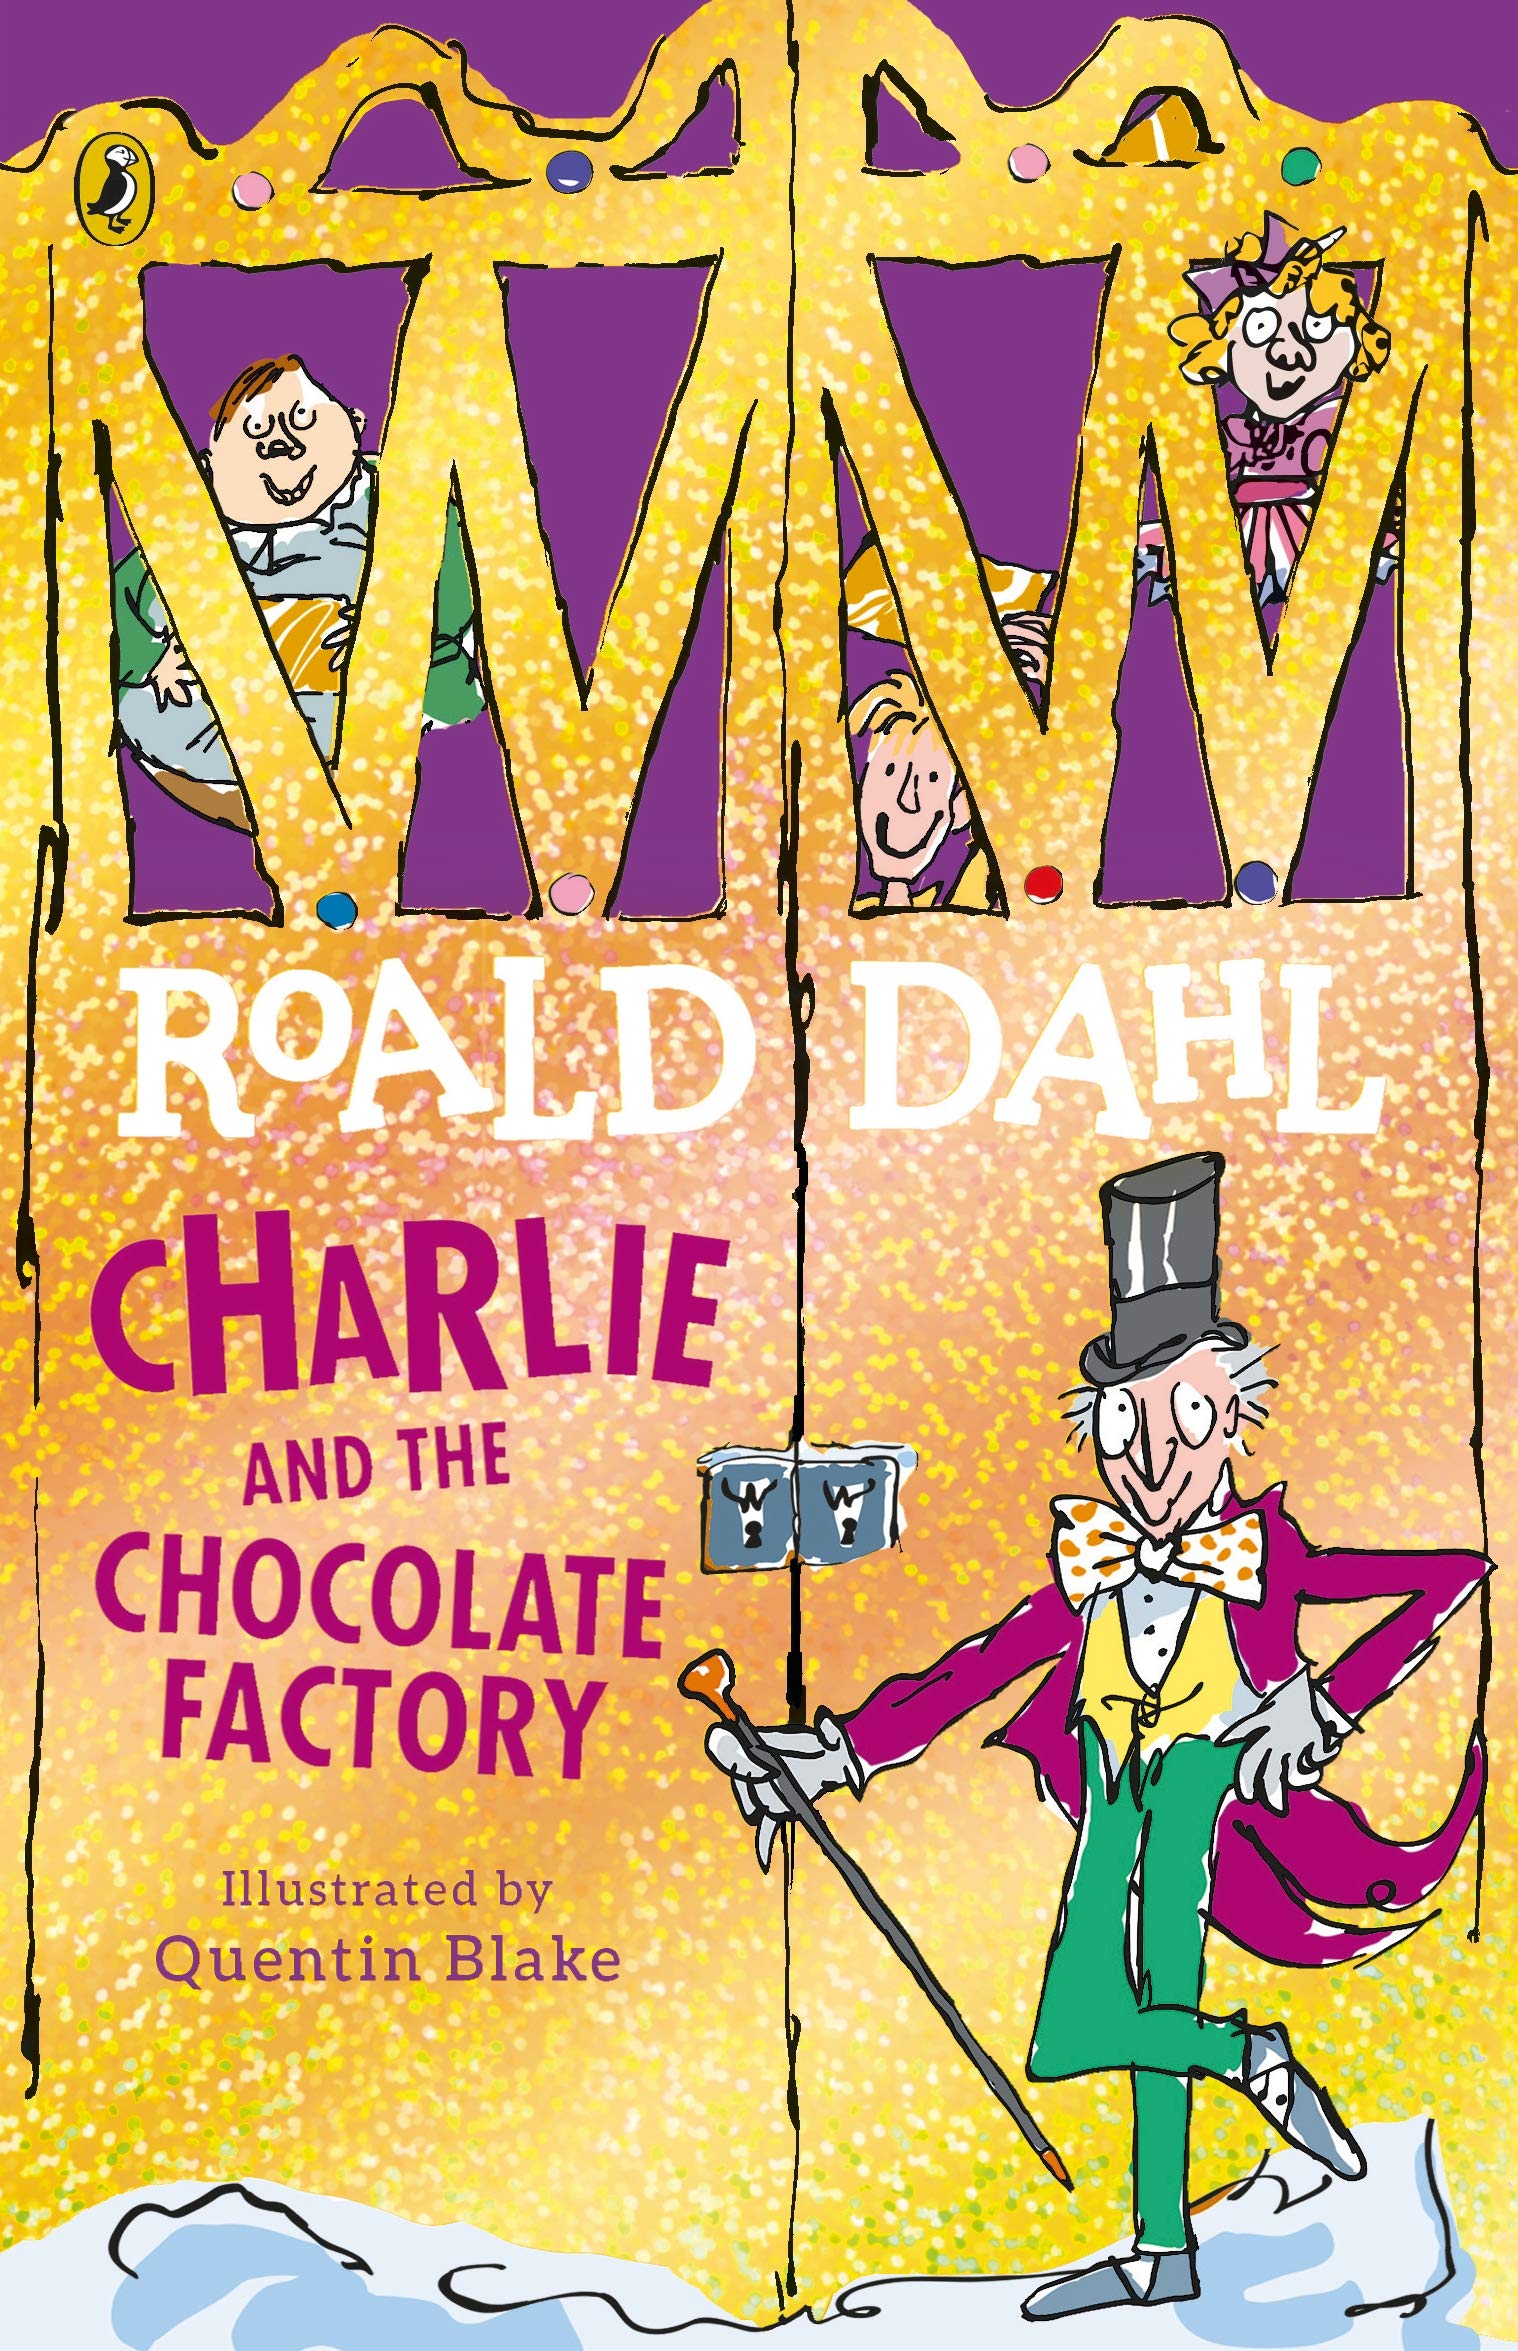 charlie and the chocolate factory book review for school